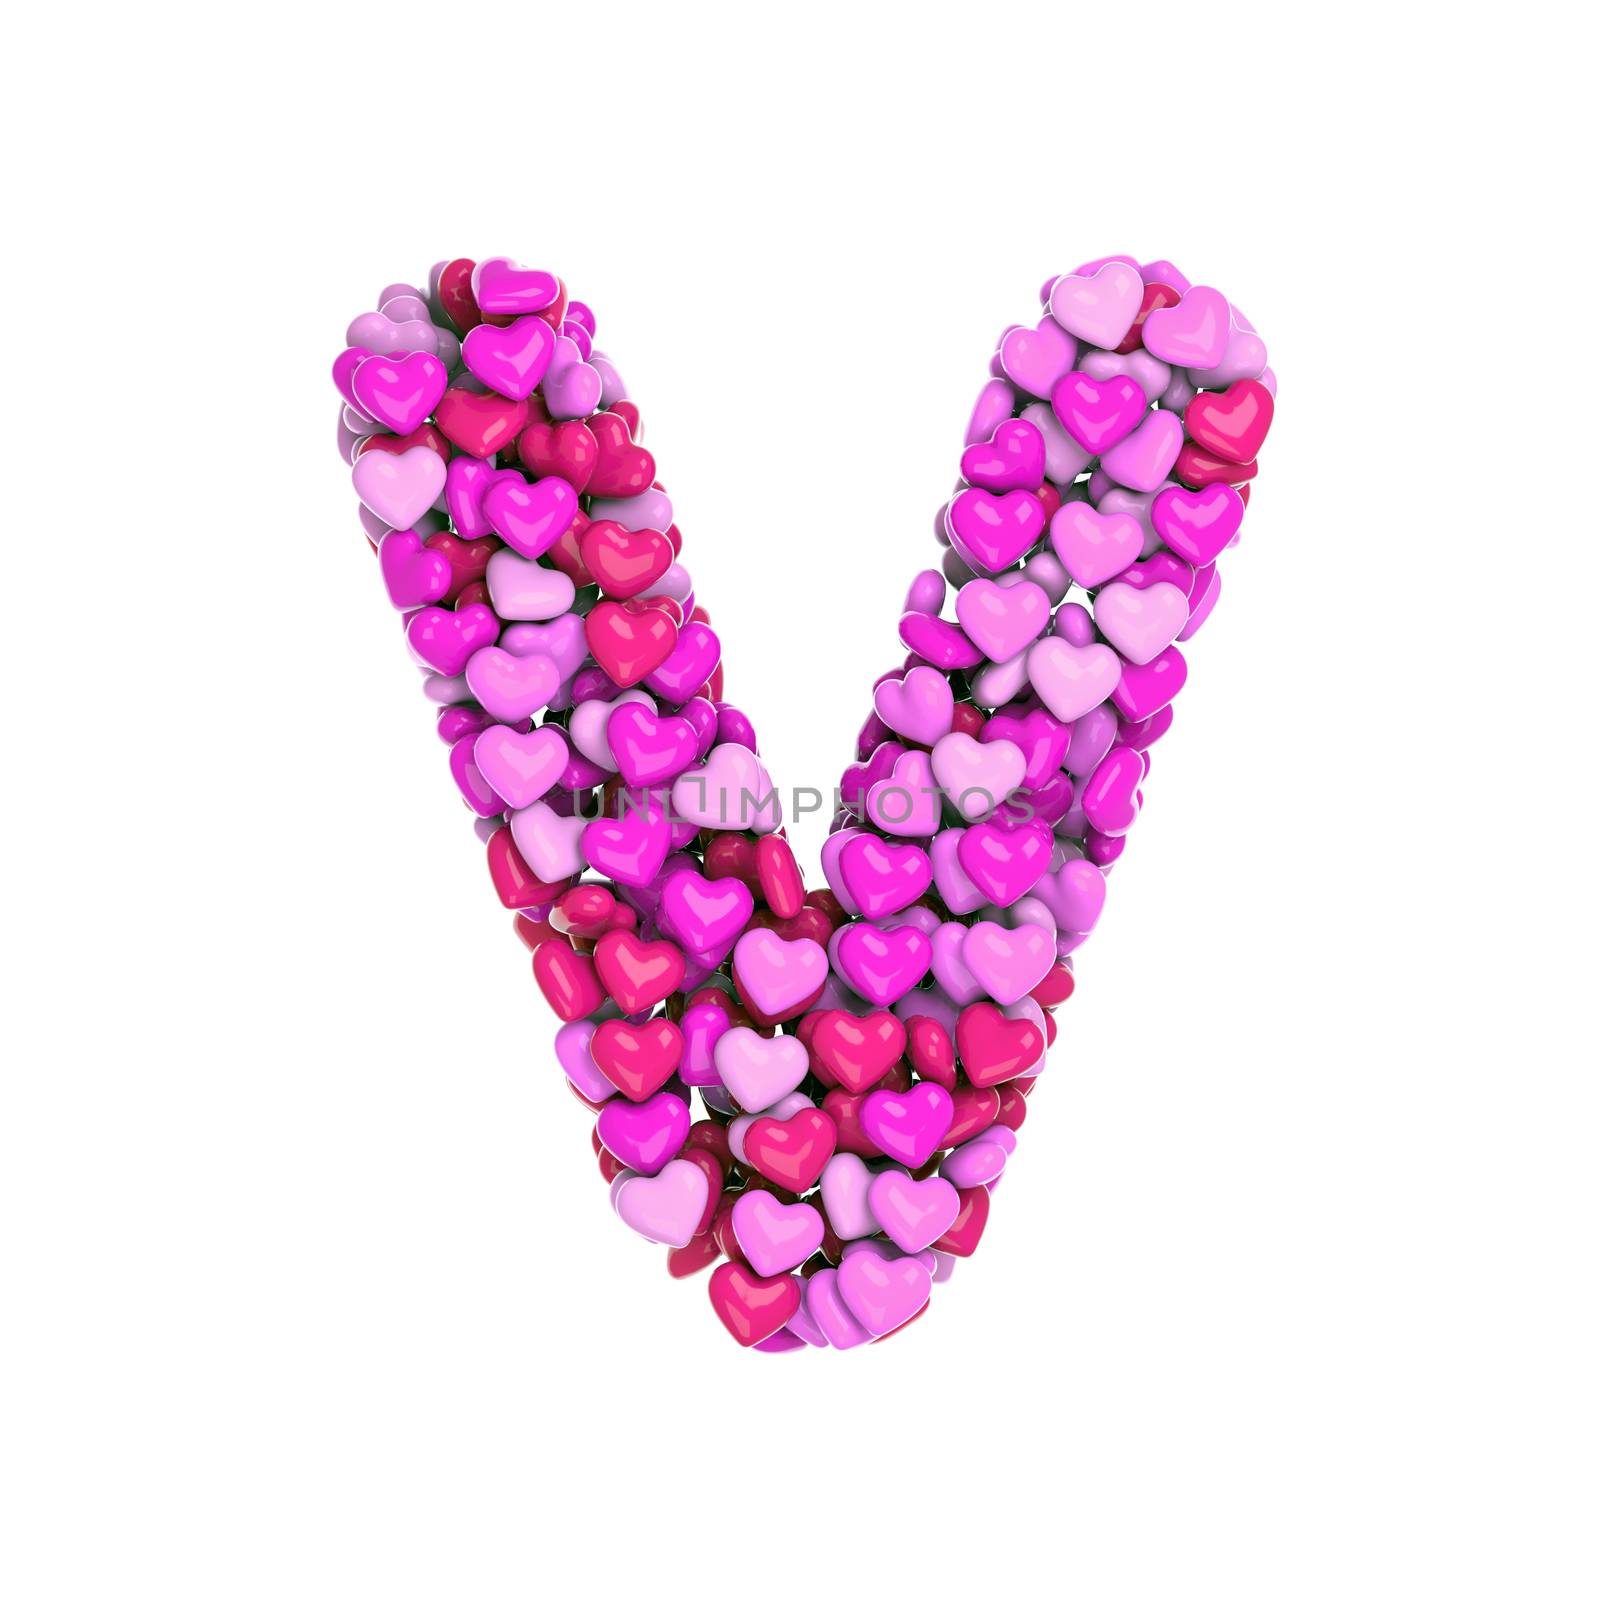 Valentine letter V - Upper-case 3d pink hearts font isolated on white background. This alphabet is perfect for creative illustrations related but not limited to Love, passion, wedding...